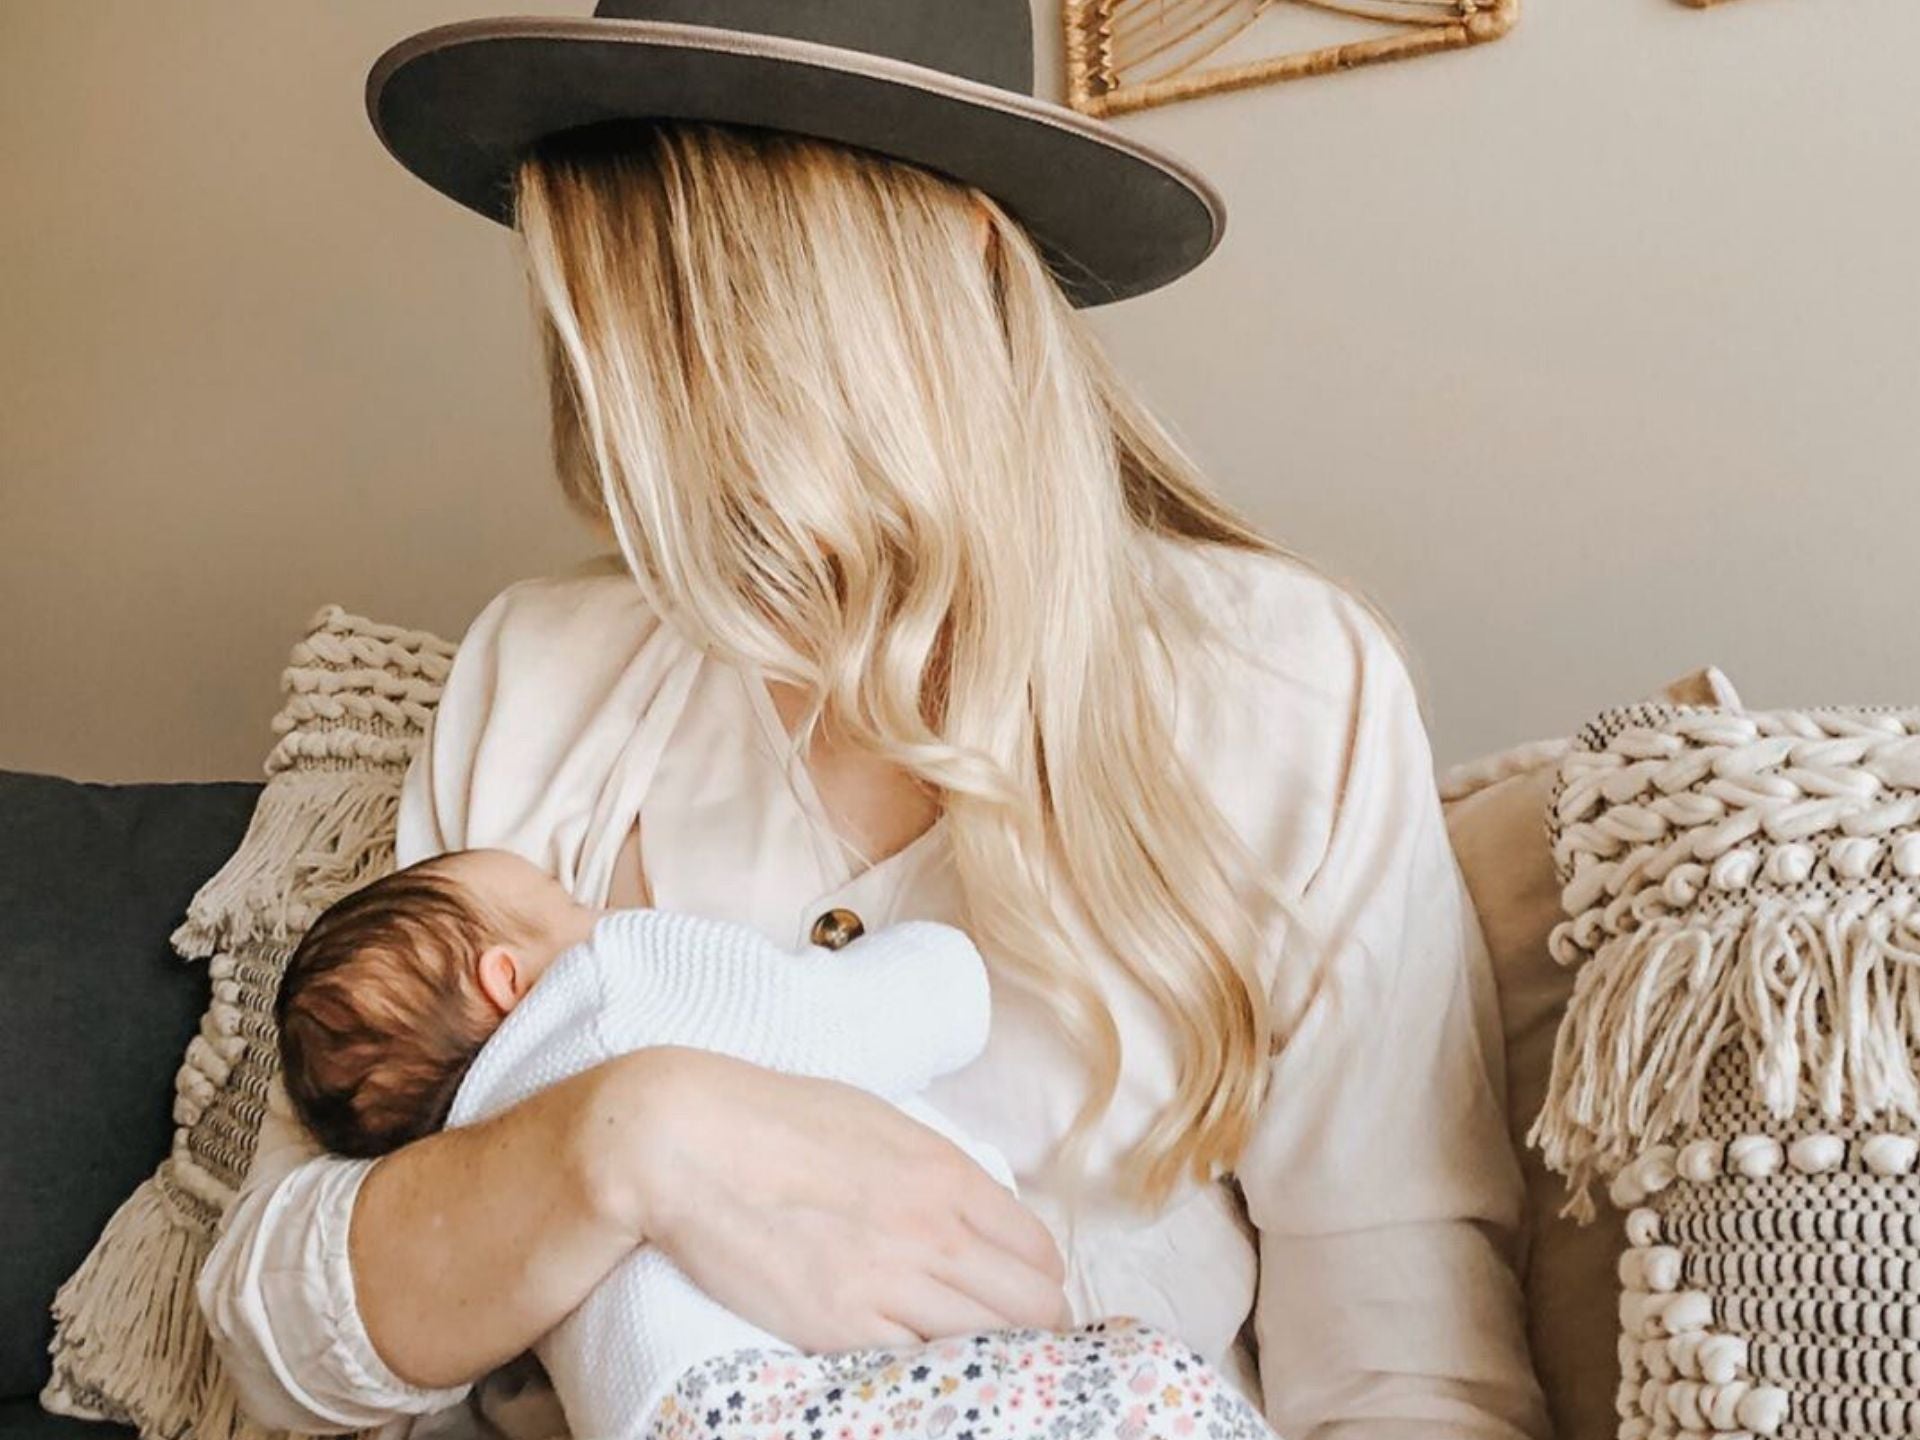 The mother of all postpartum outfits, Fashion